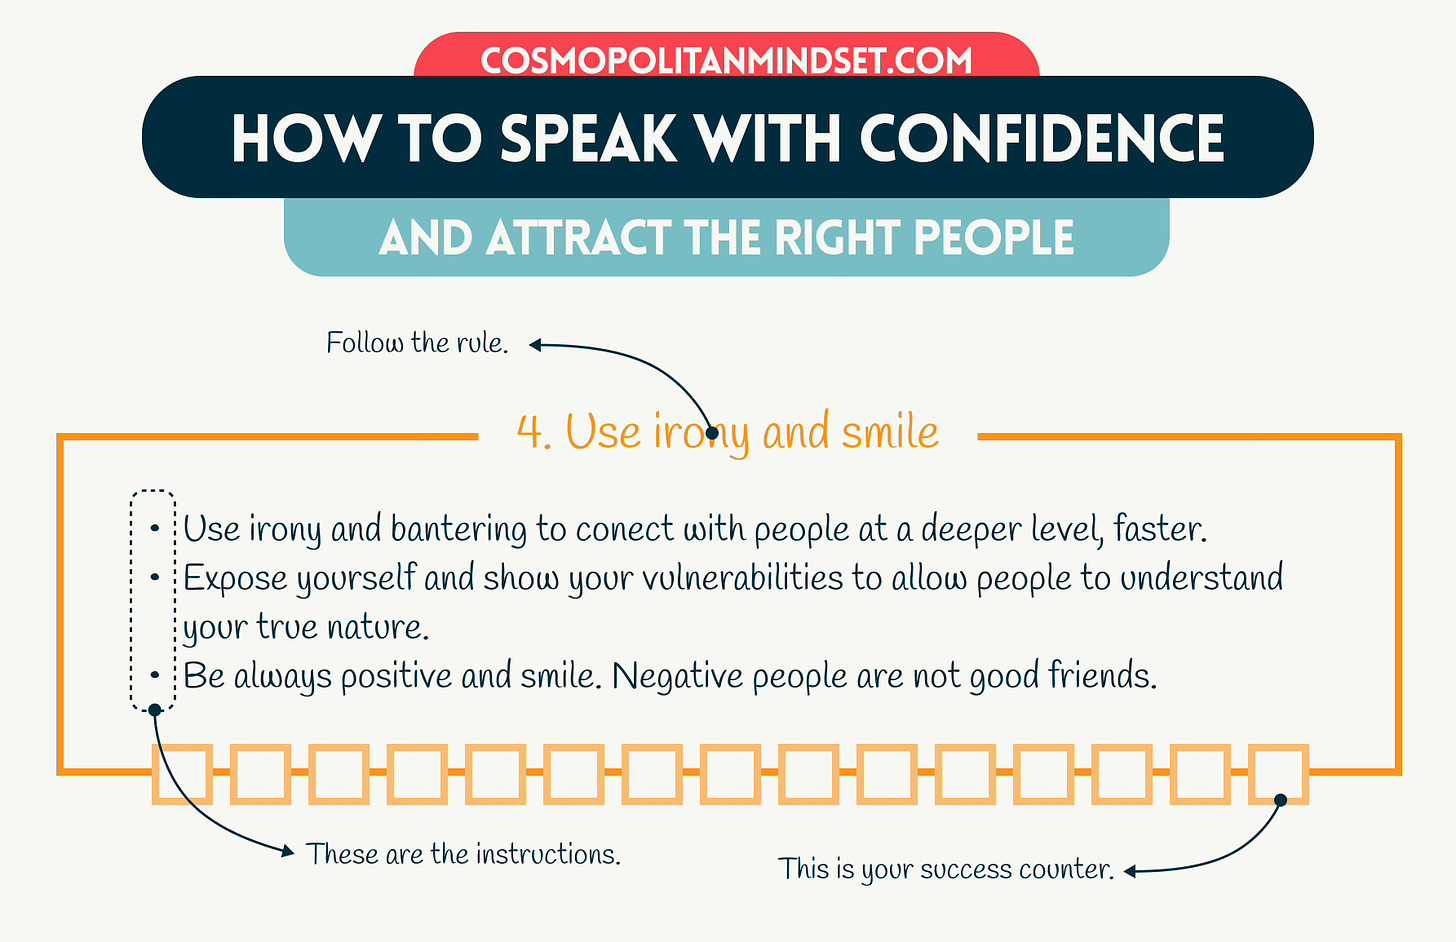 How to Speak with Confidence — Instructions